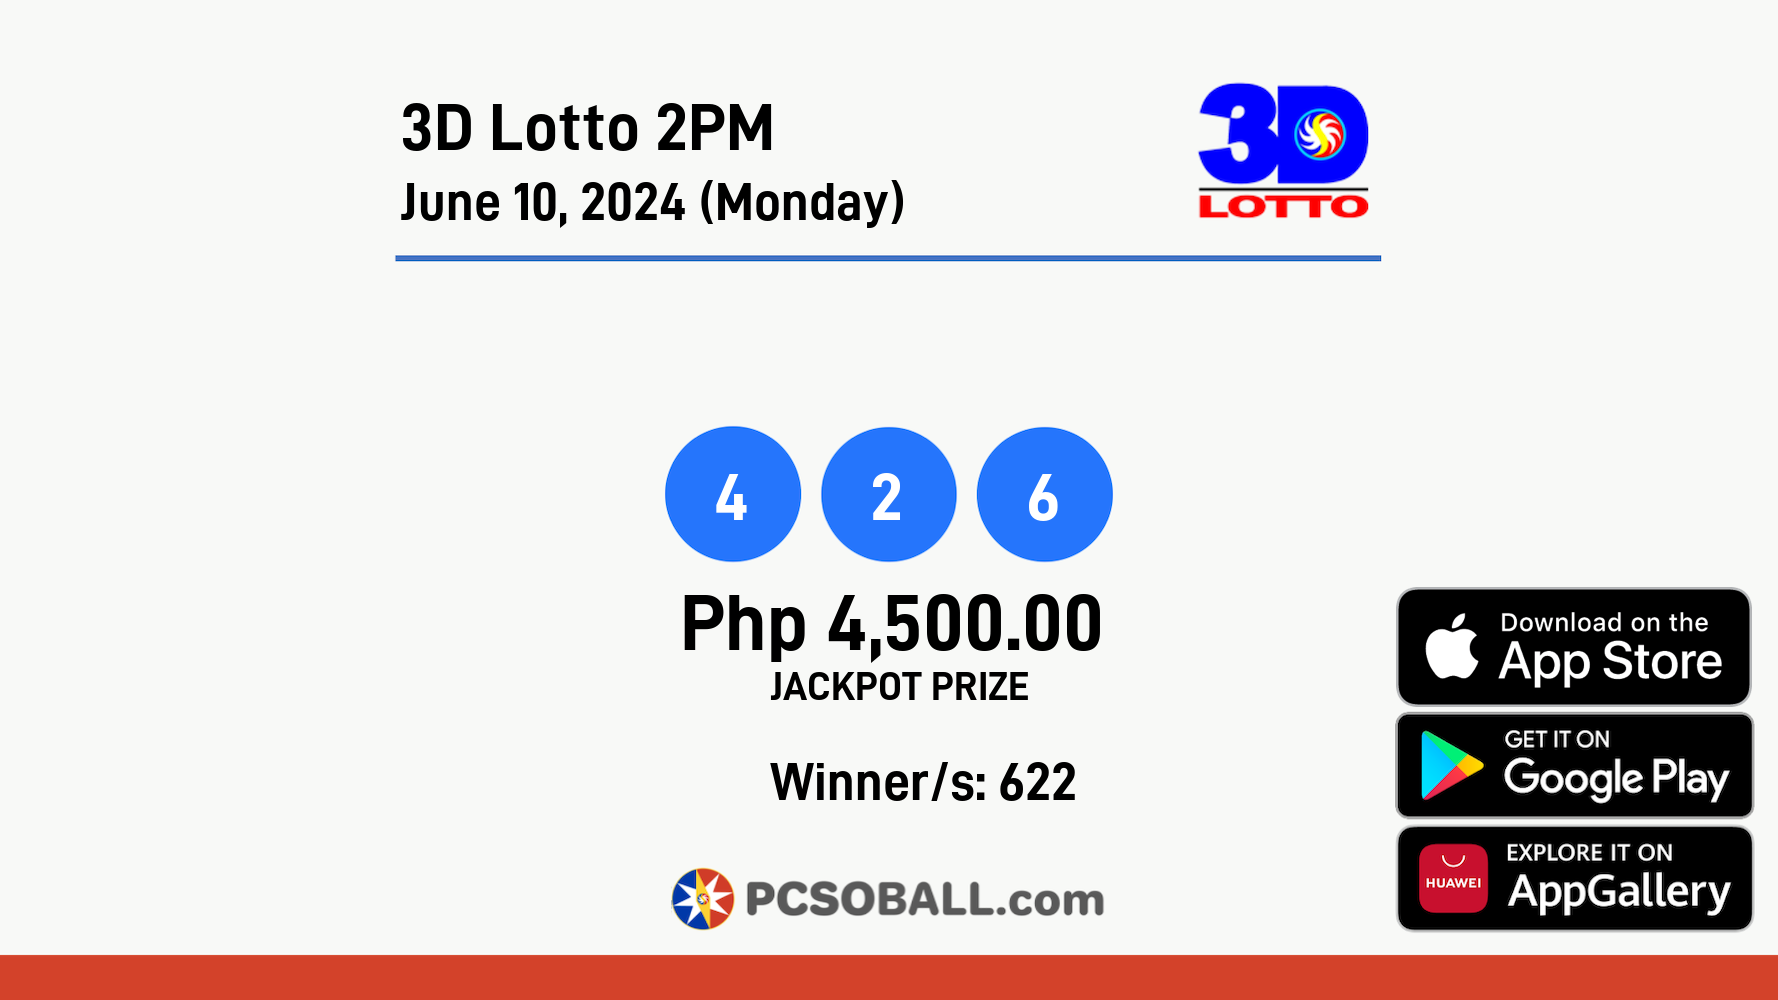 3D Lotto 2PM June 10, 2024 (Monday) Result